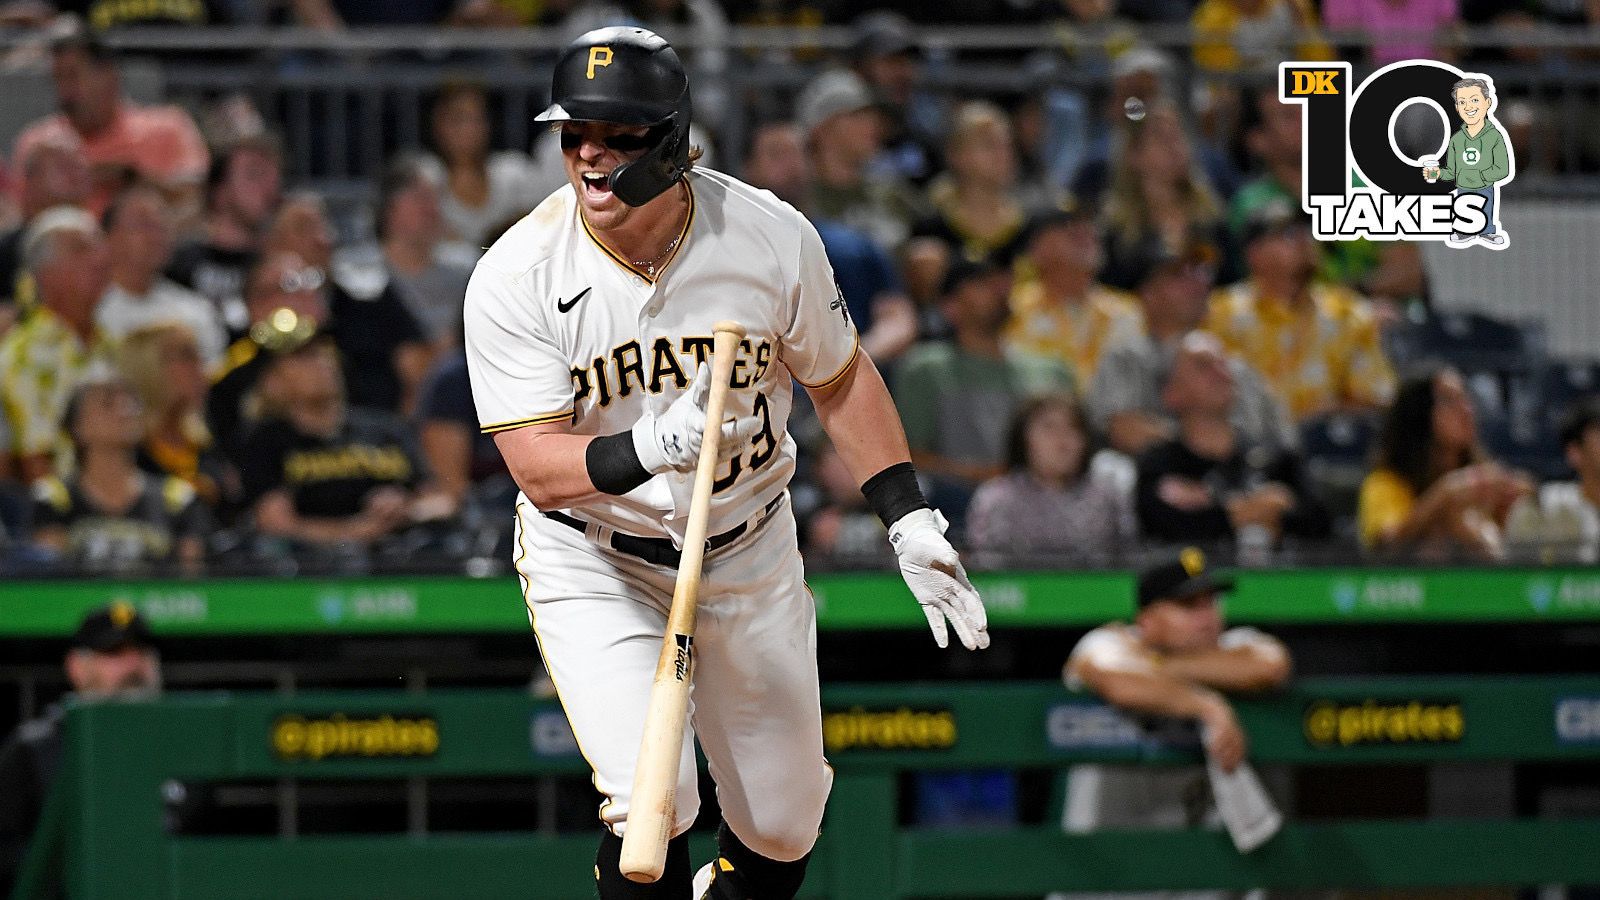 Kovacevic: This stretch of baseball's one of the worst